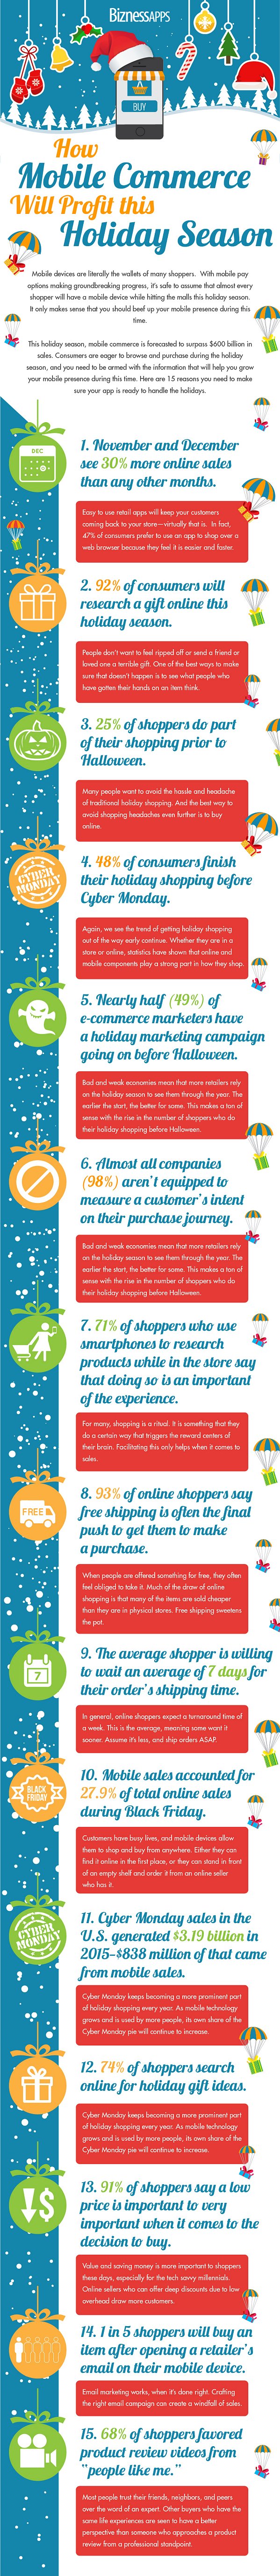 bizapps-holiday-infographic